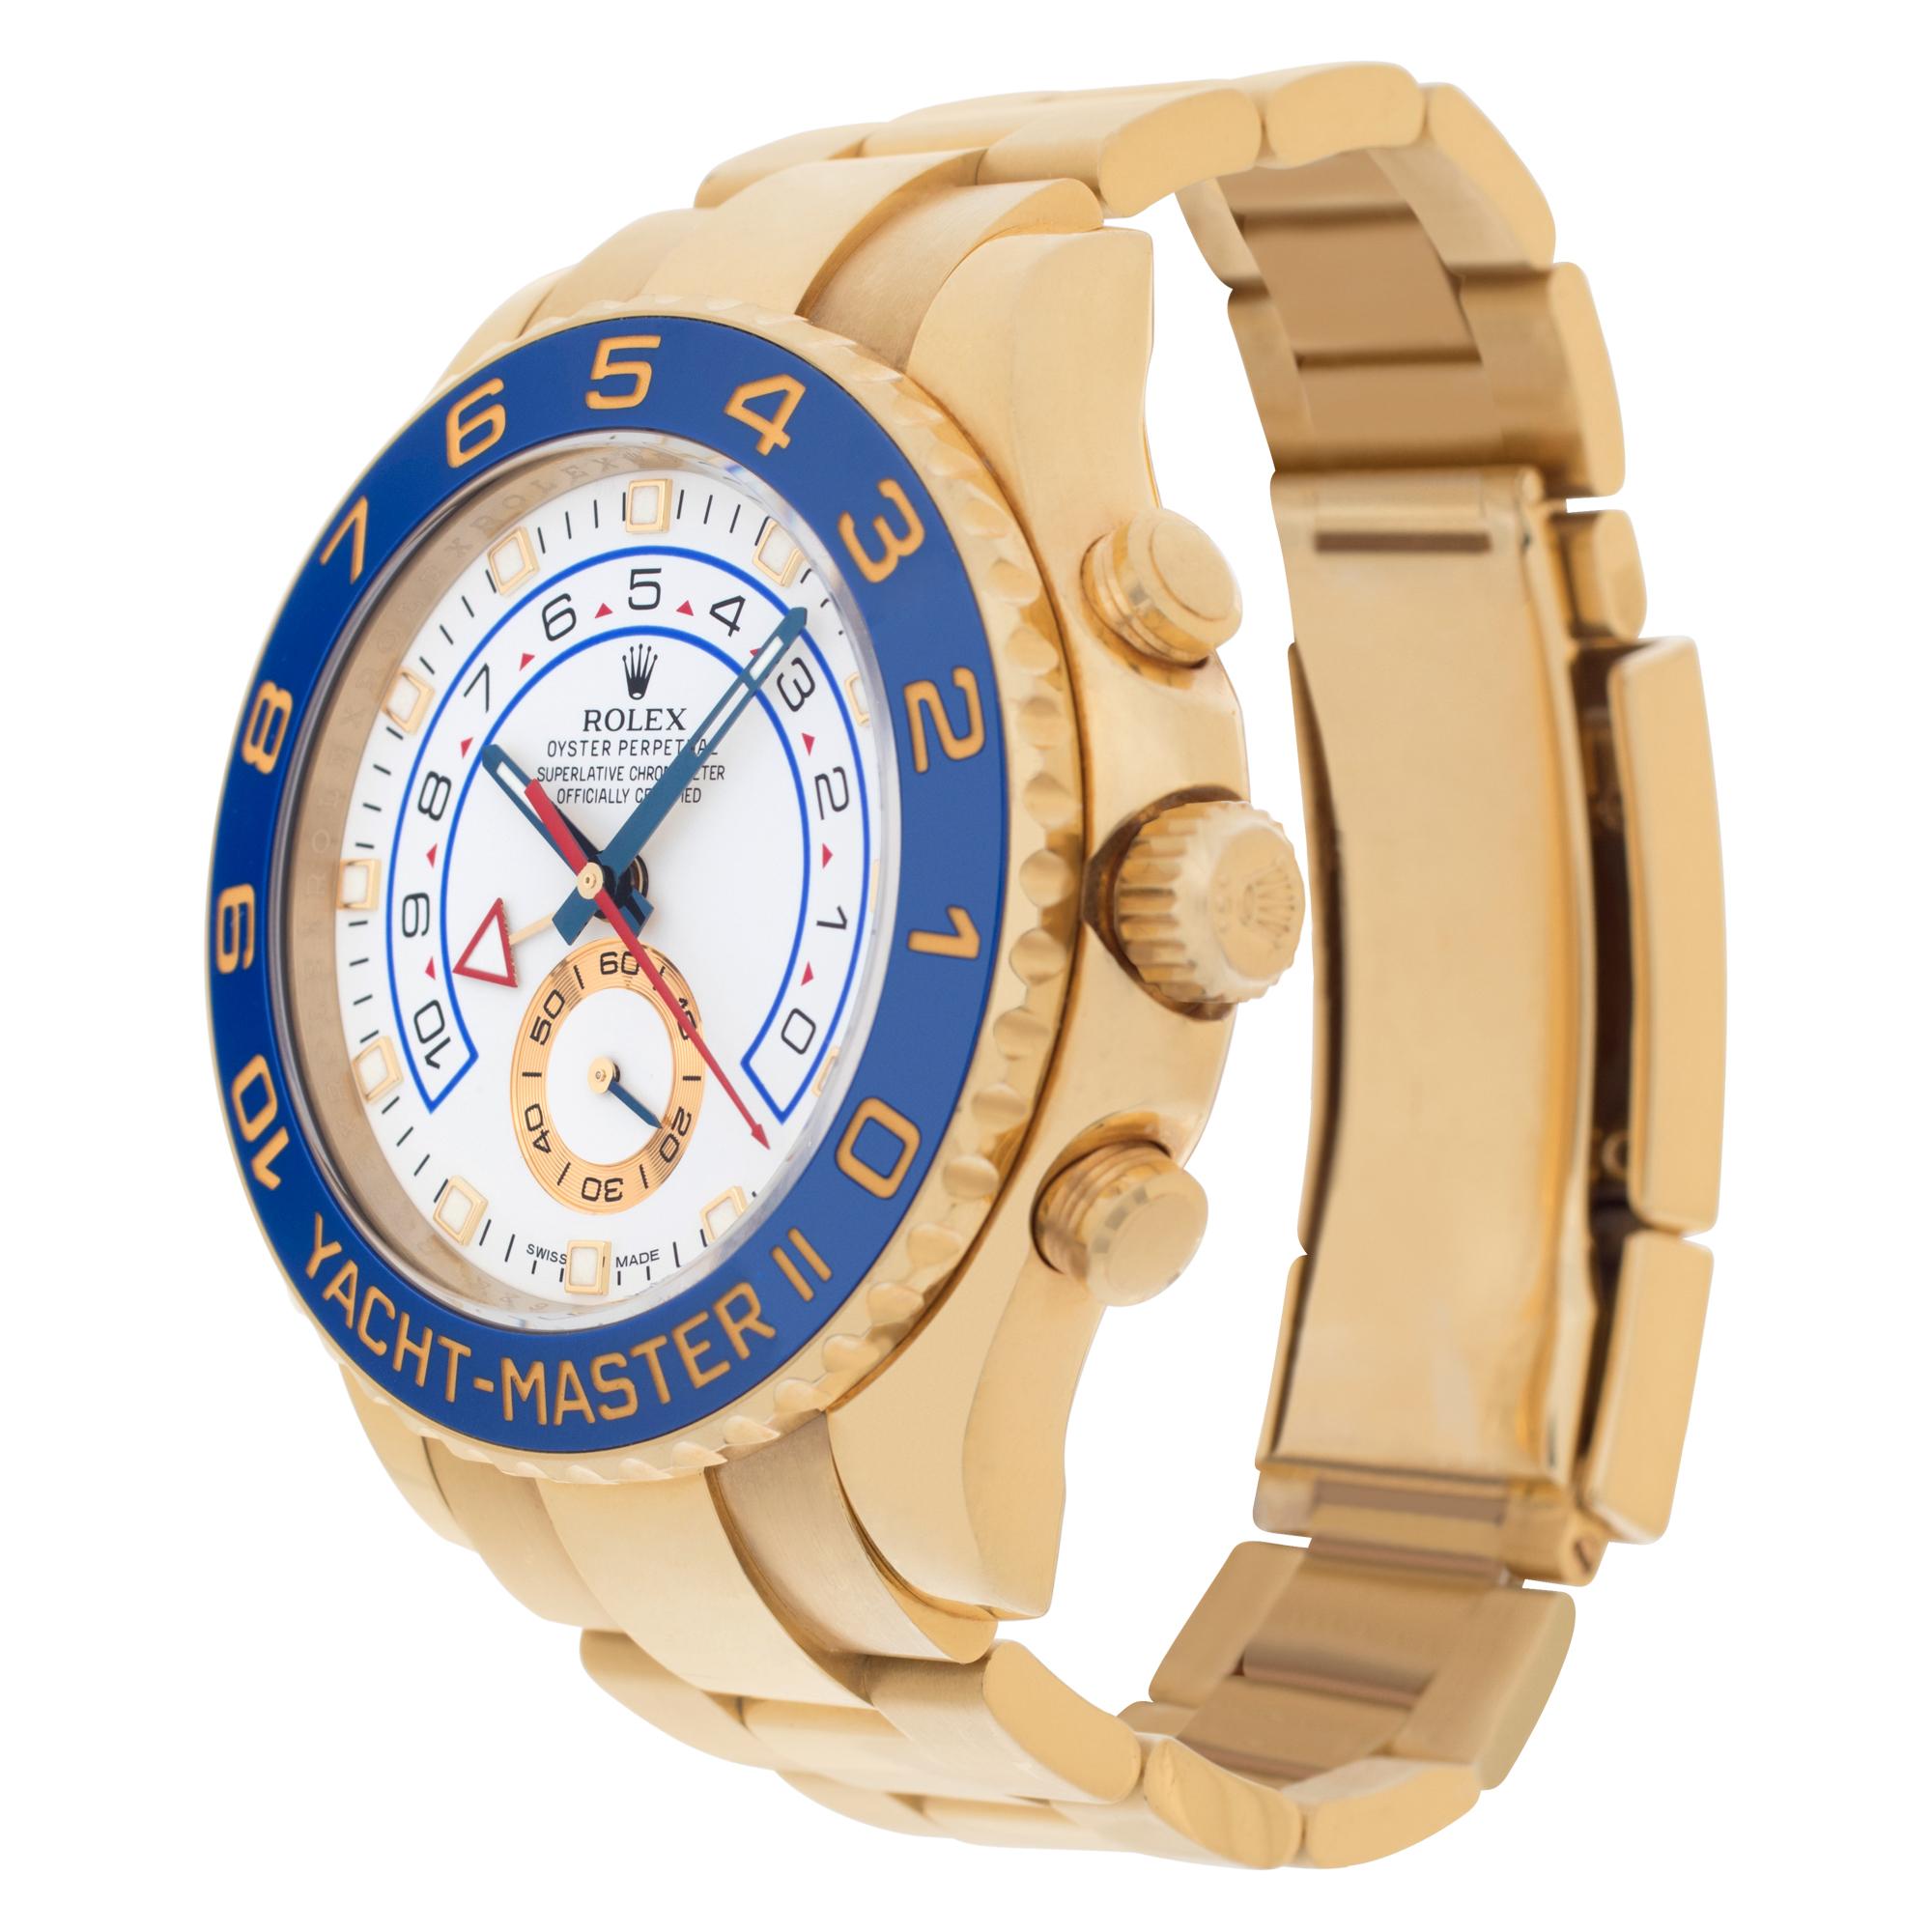 Rolex Yacht-Master II in 18k yellow gold. Auto w/ subseconds and regatta countdown. 44 mm case size.  Ref 116688. Box and booklets. Circa 2007. Fine Pre-owned Rolex Watch.

Certified preowned Sport Rolex Yacht-Master II 116688 watch is made out of